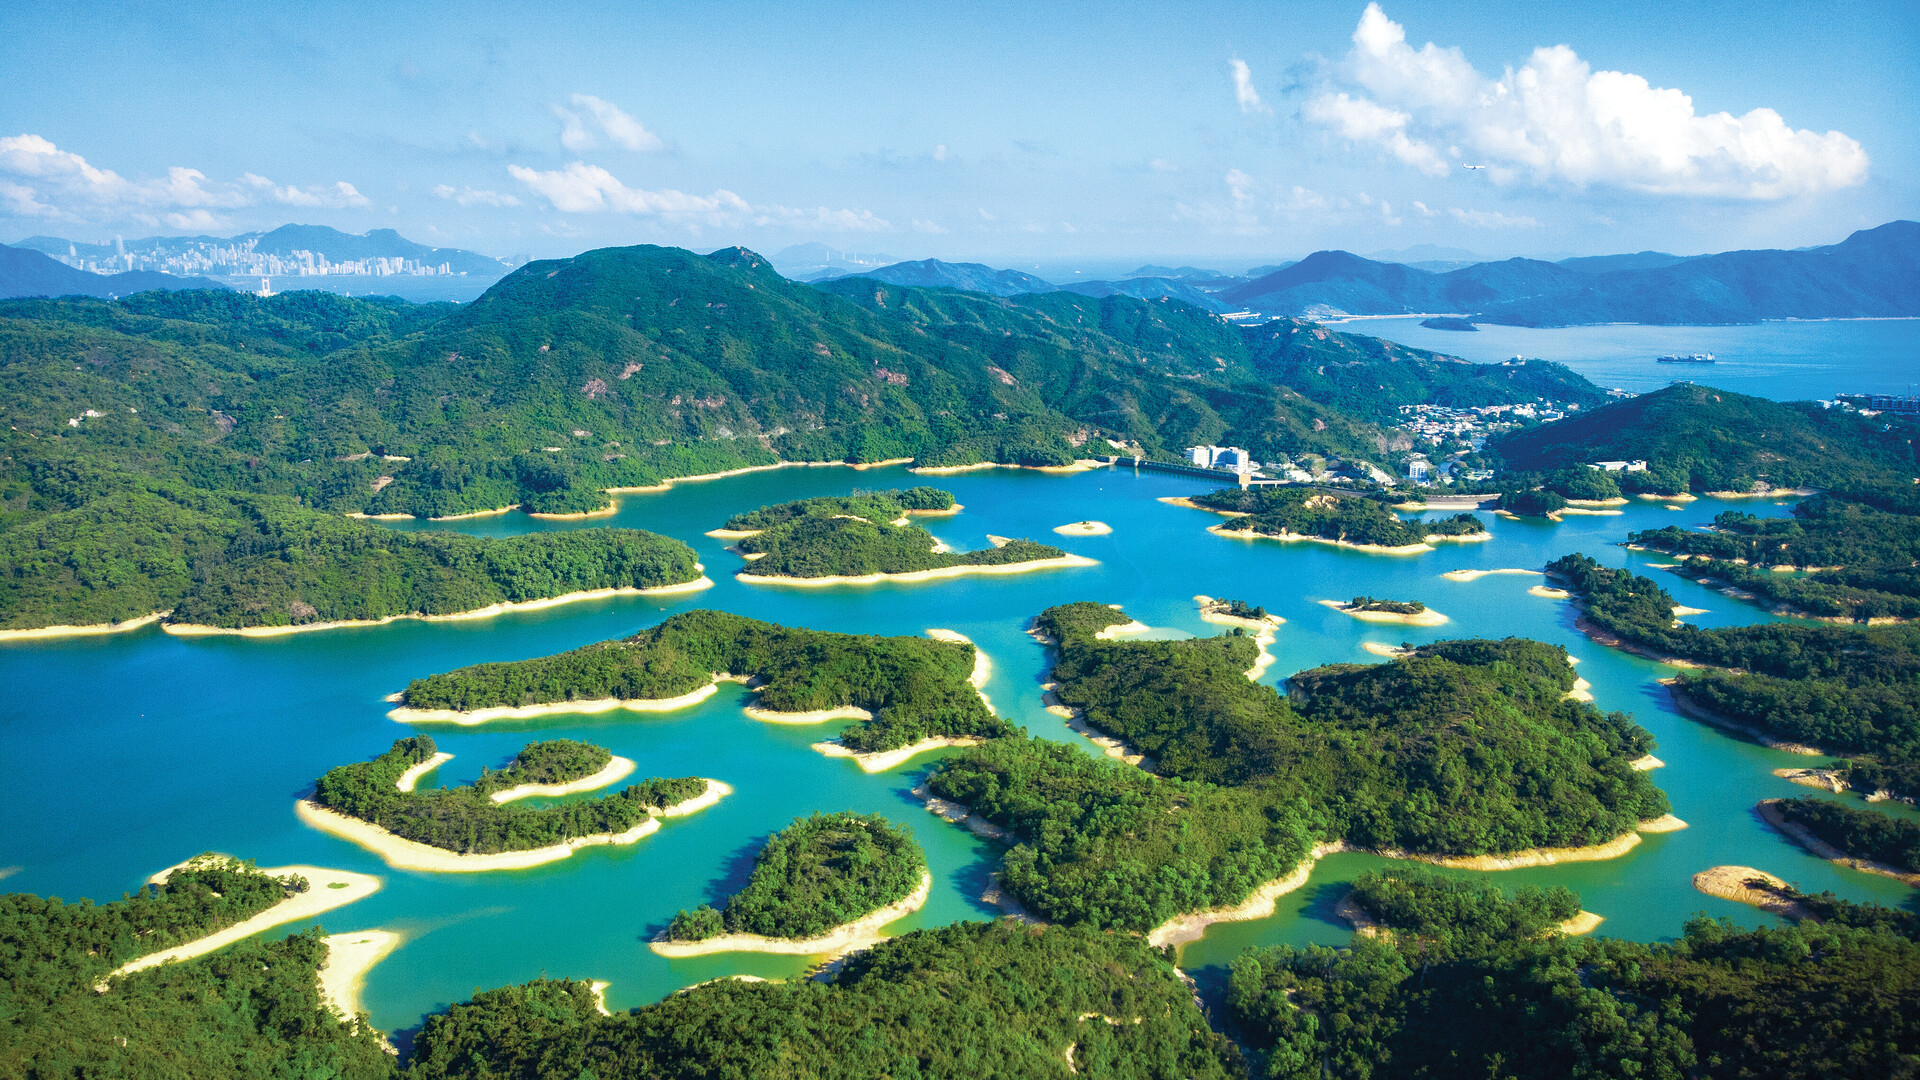 Aerial view of a series of small islands surrounded by turquoise waters